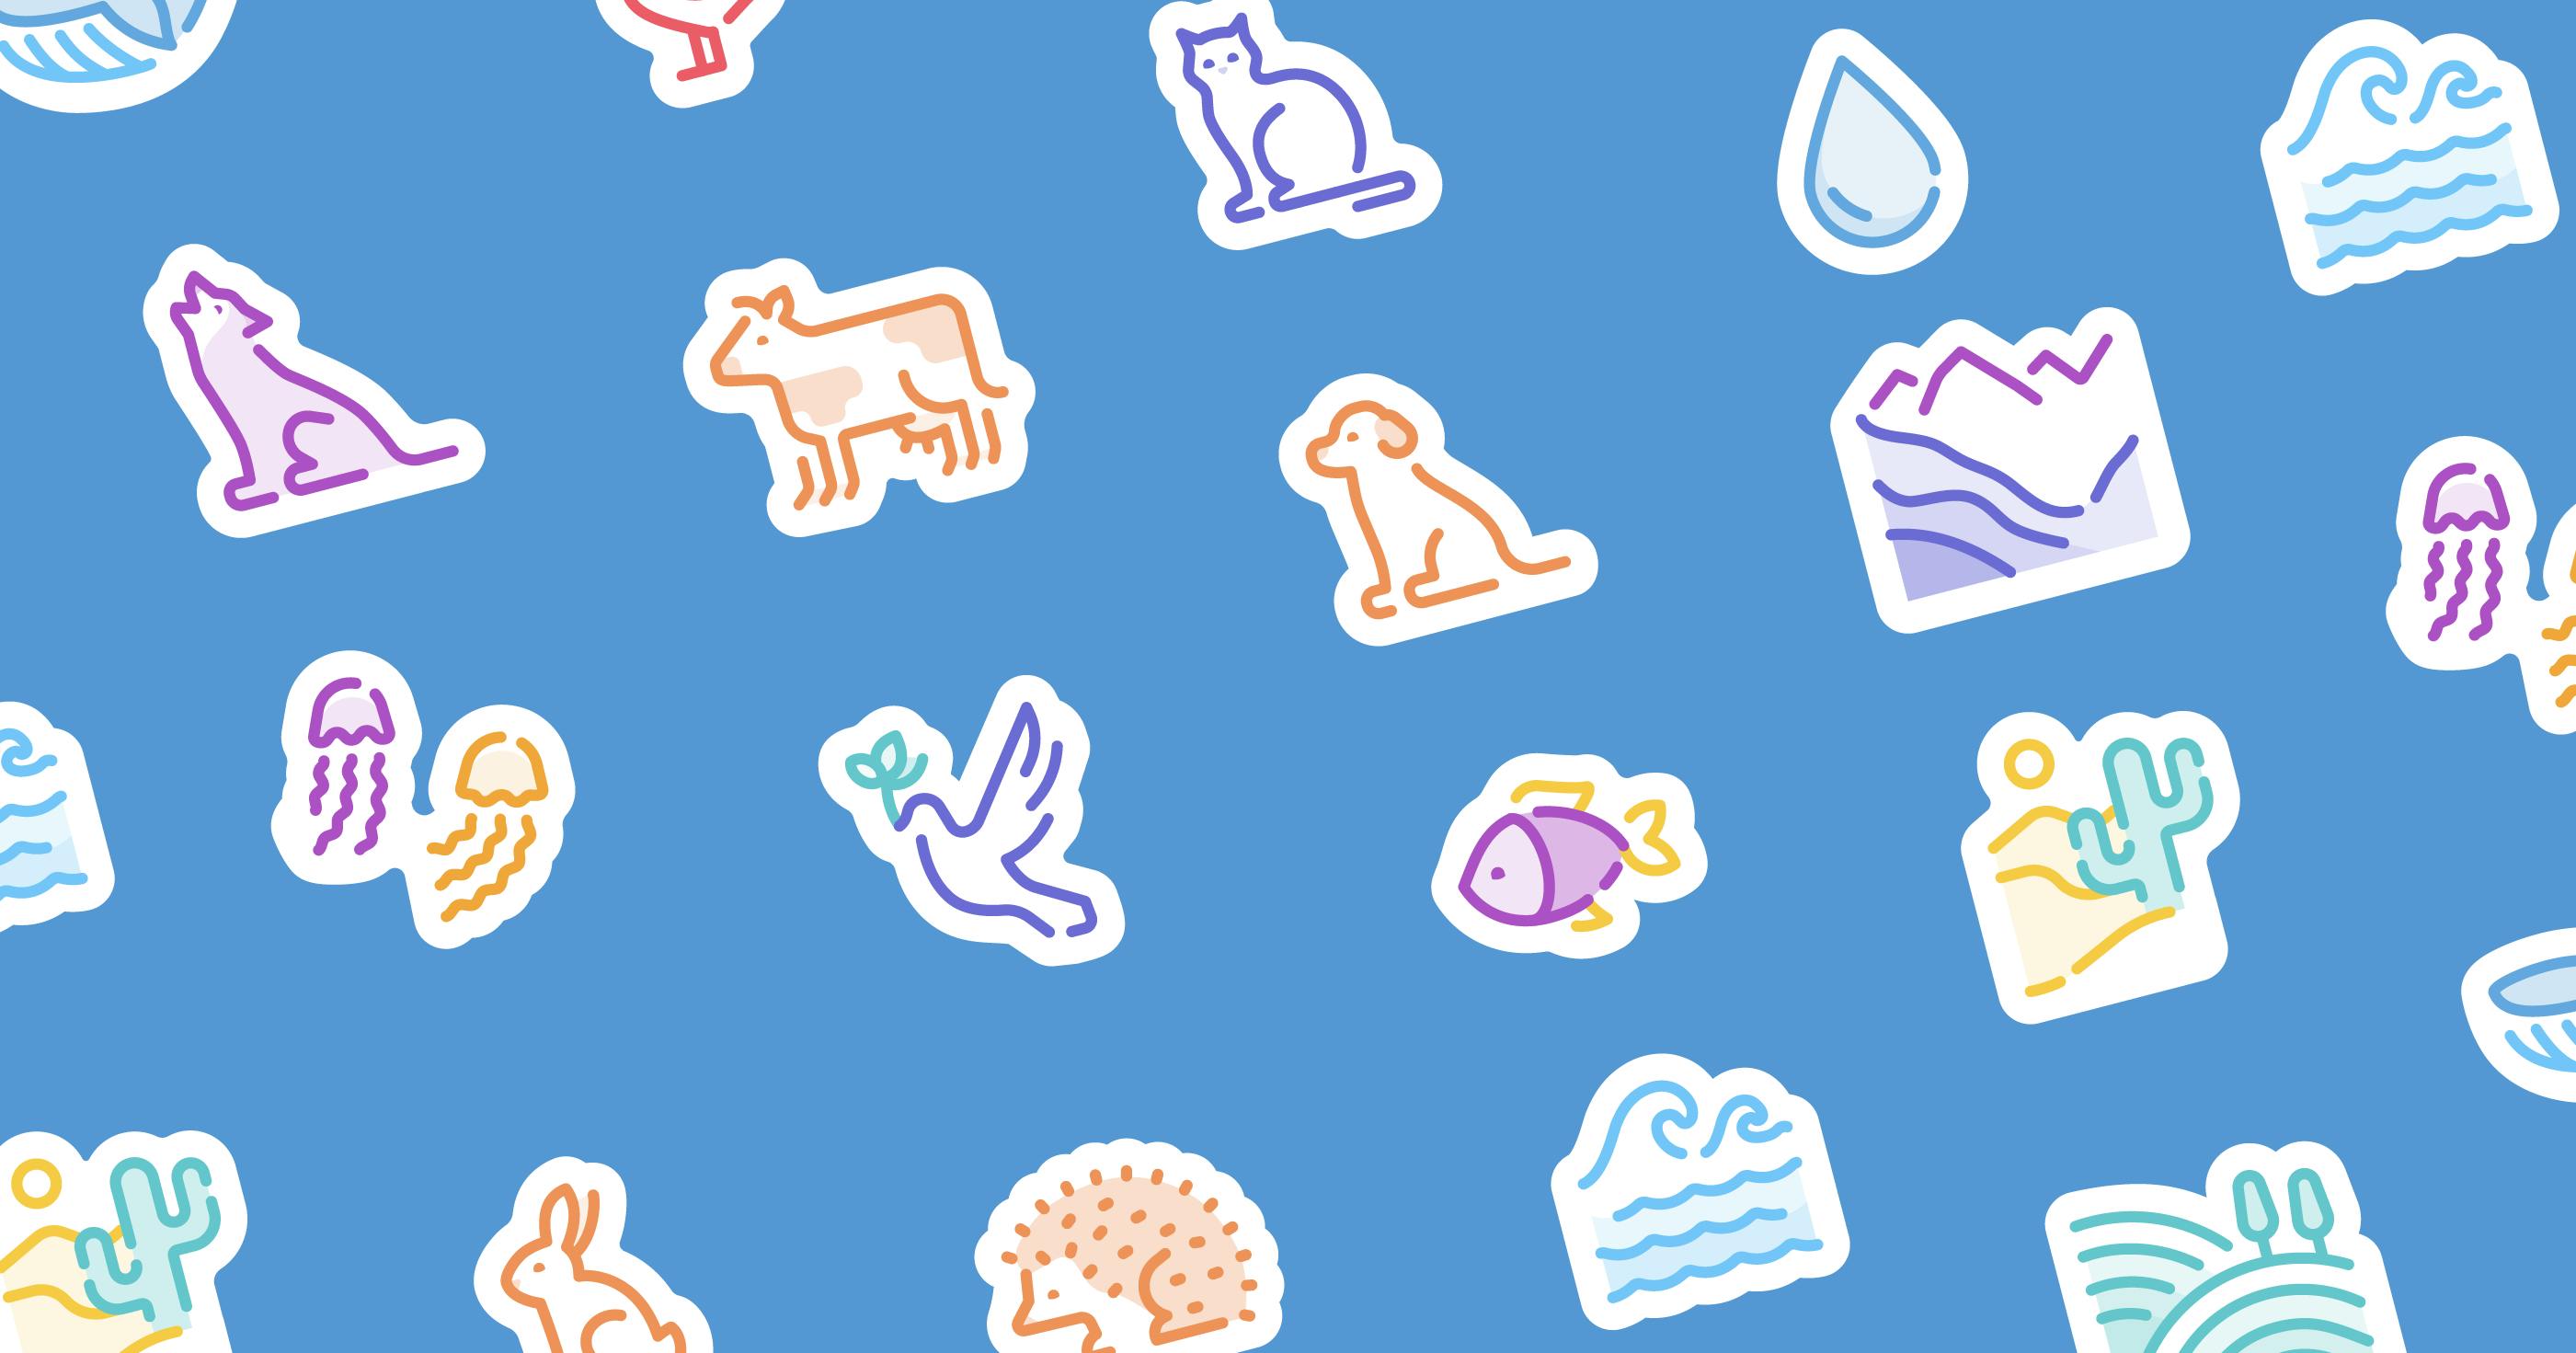 Stickers with cat, dog, cow, rabbit, and wave